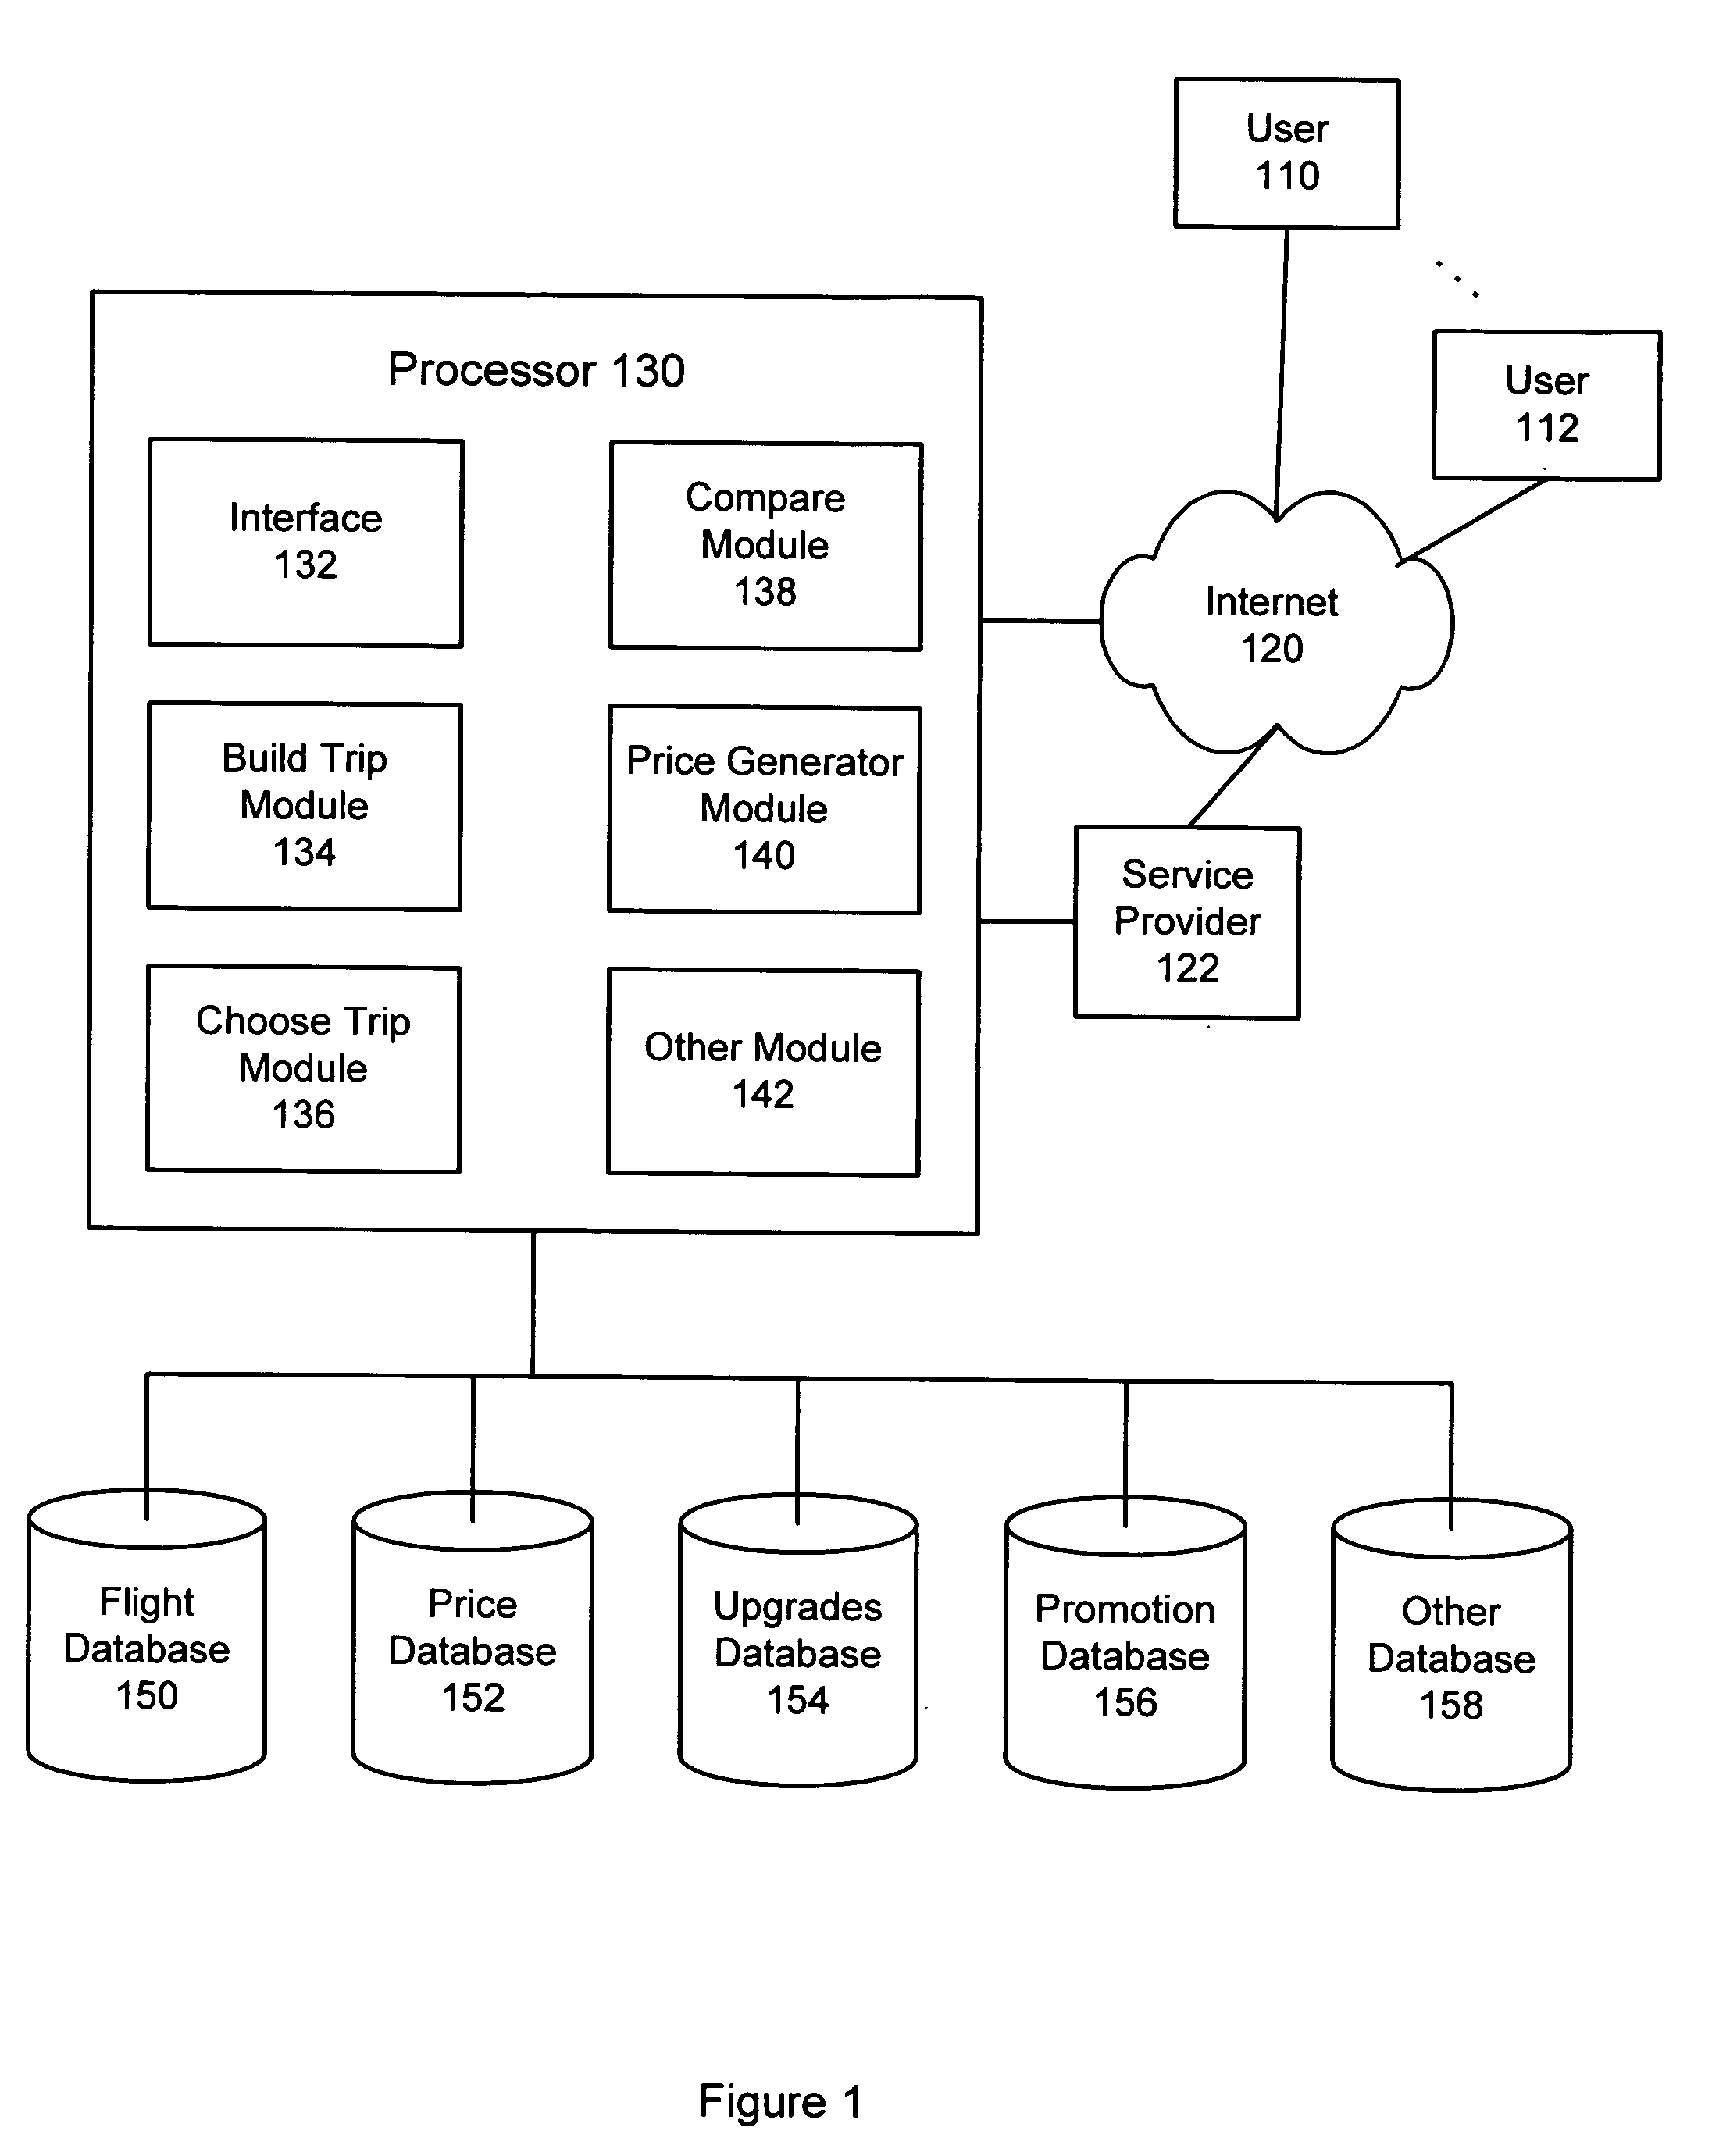 Method and system for scheduling travel ltineraries through an online interface